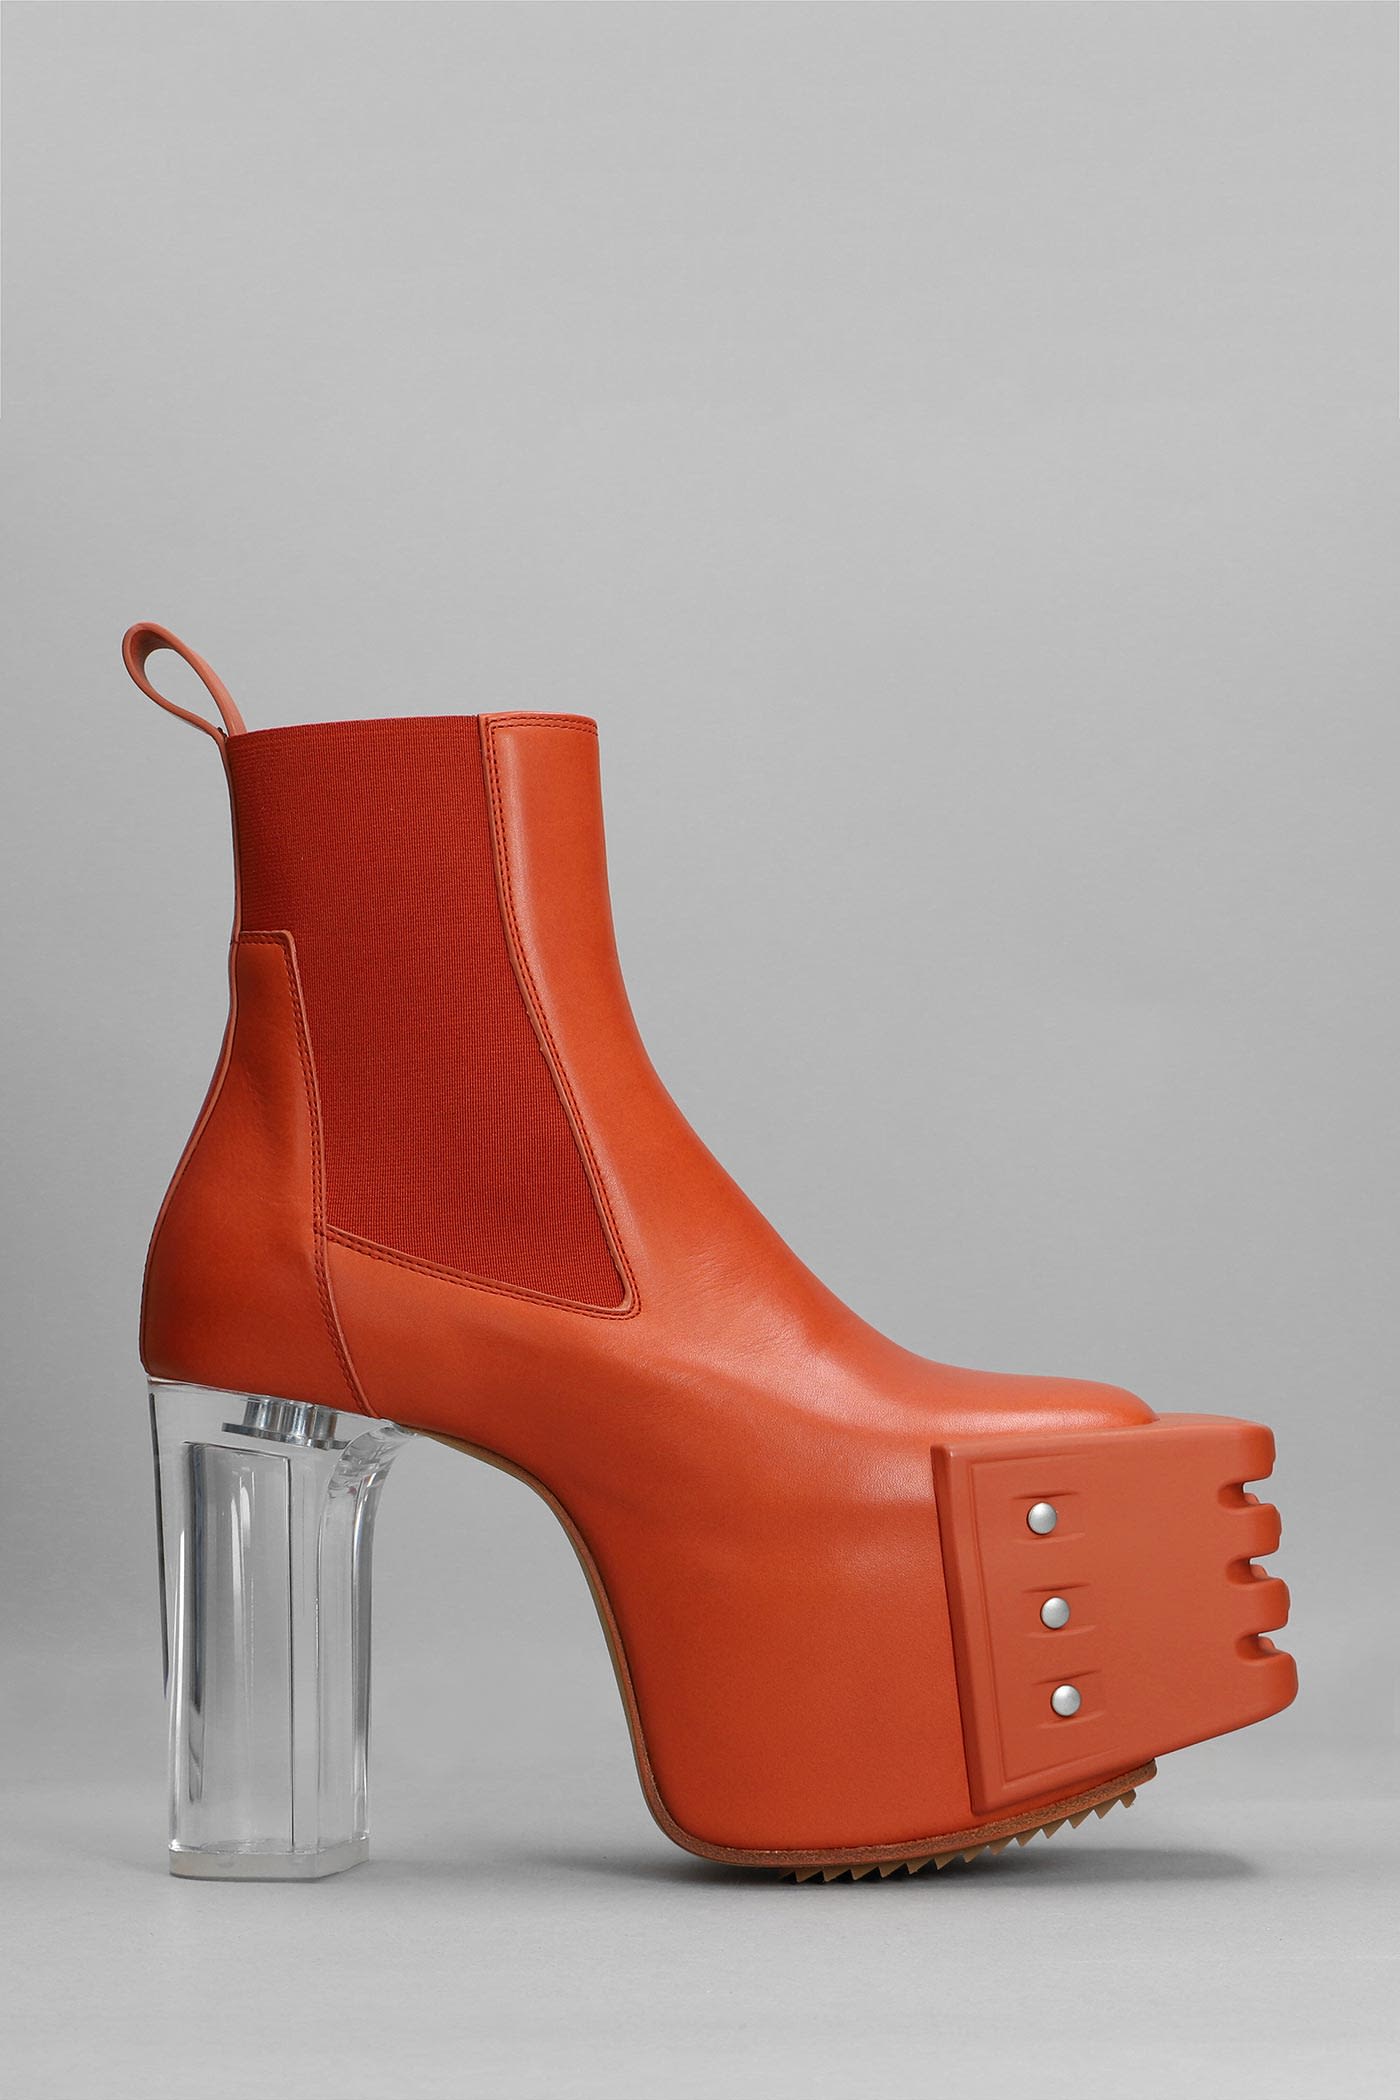 RICK OWENS HIGH HEELS ANKLE BOOTS IN ORANGE LEATHER